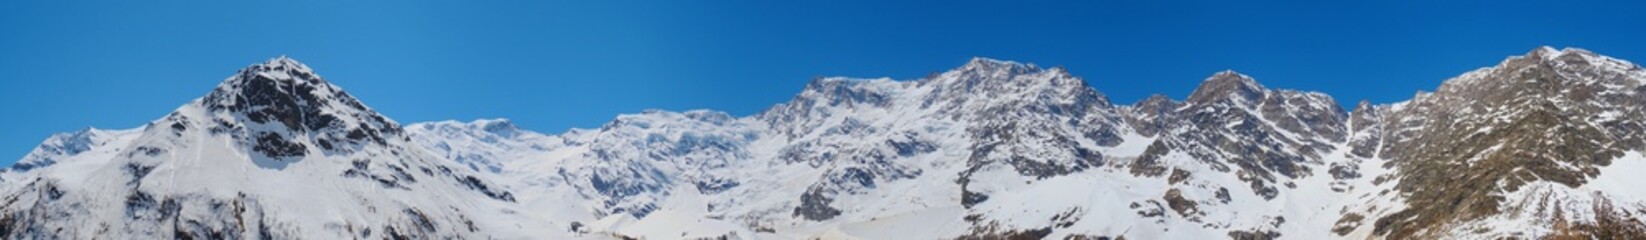 Panoramic view of the Monte Rosa with its glacier, in the northern Italian Alps - May 2019